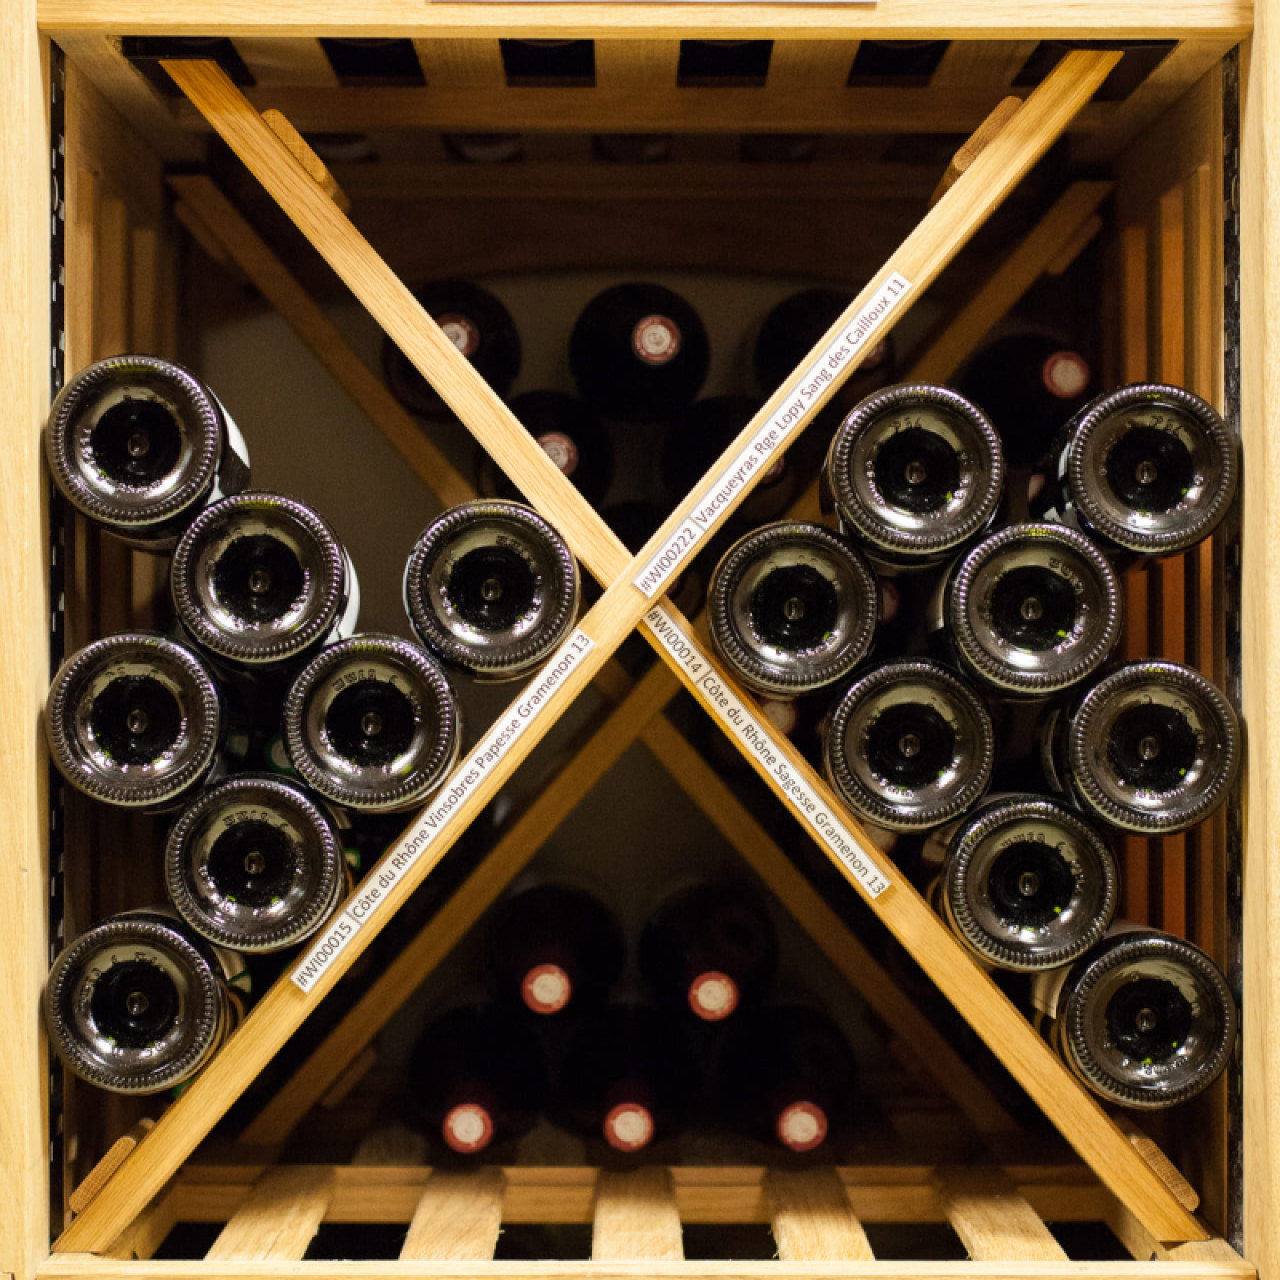 Cross module - Locker with sturdy fixed shelf in solid oak wood to store a large quantity of wines stacked safely.